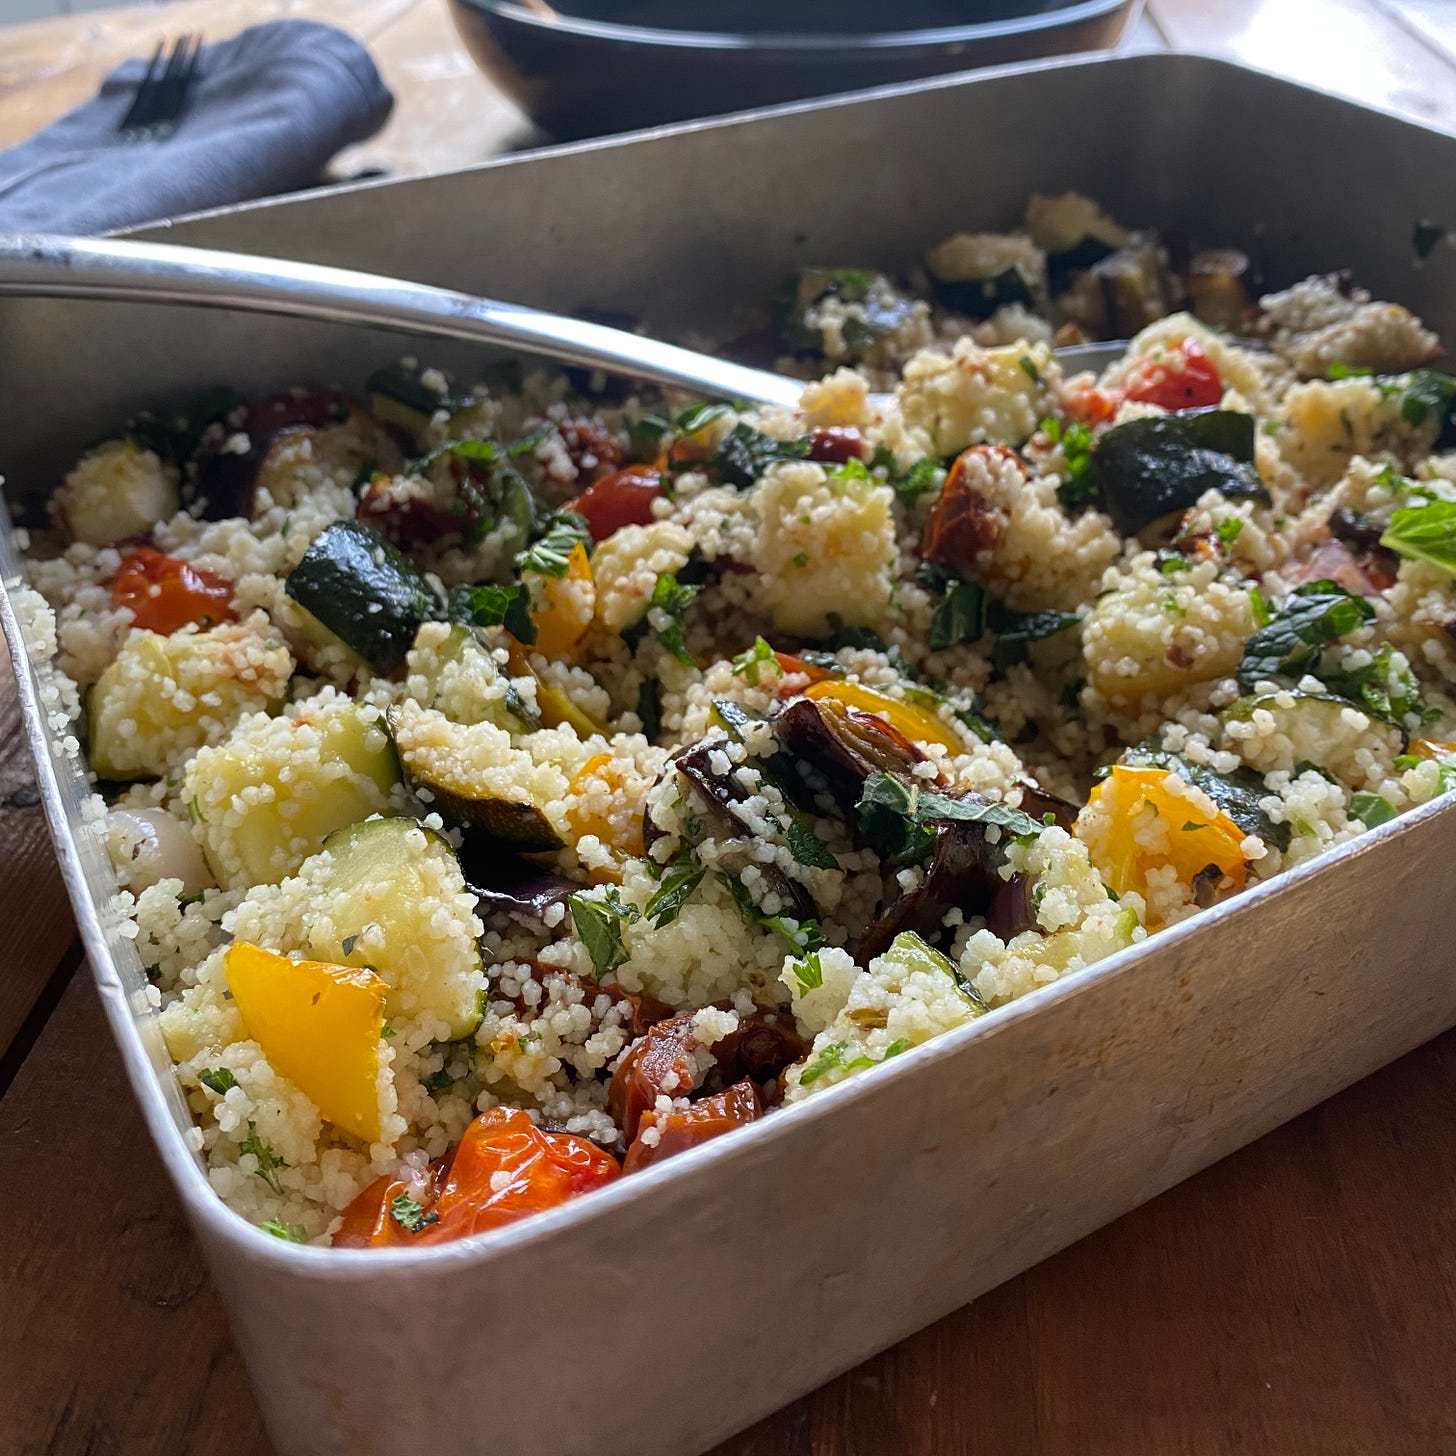 Aluminium oven tray filled with roasted courgette, aubergine, peppers, onion and tomatoes stirred through cous cous